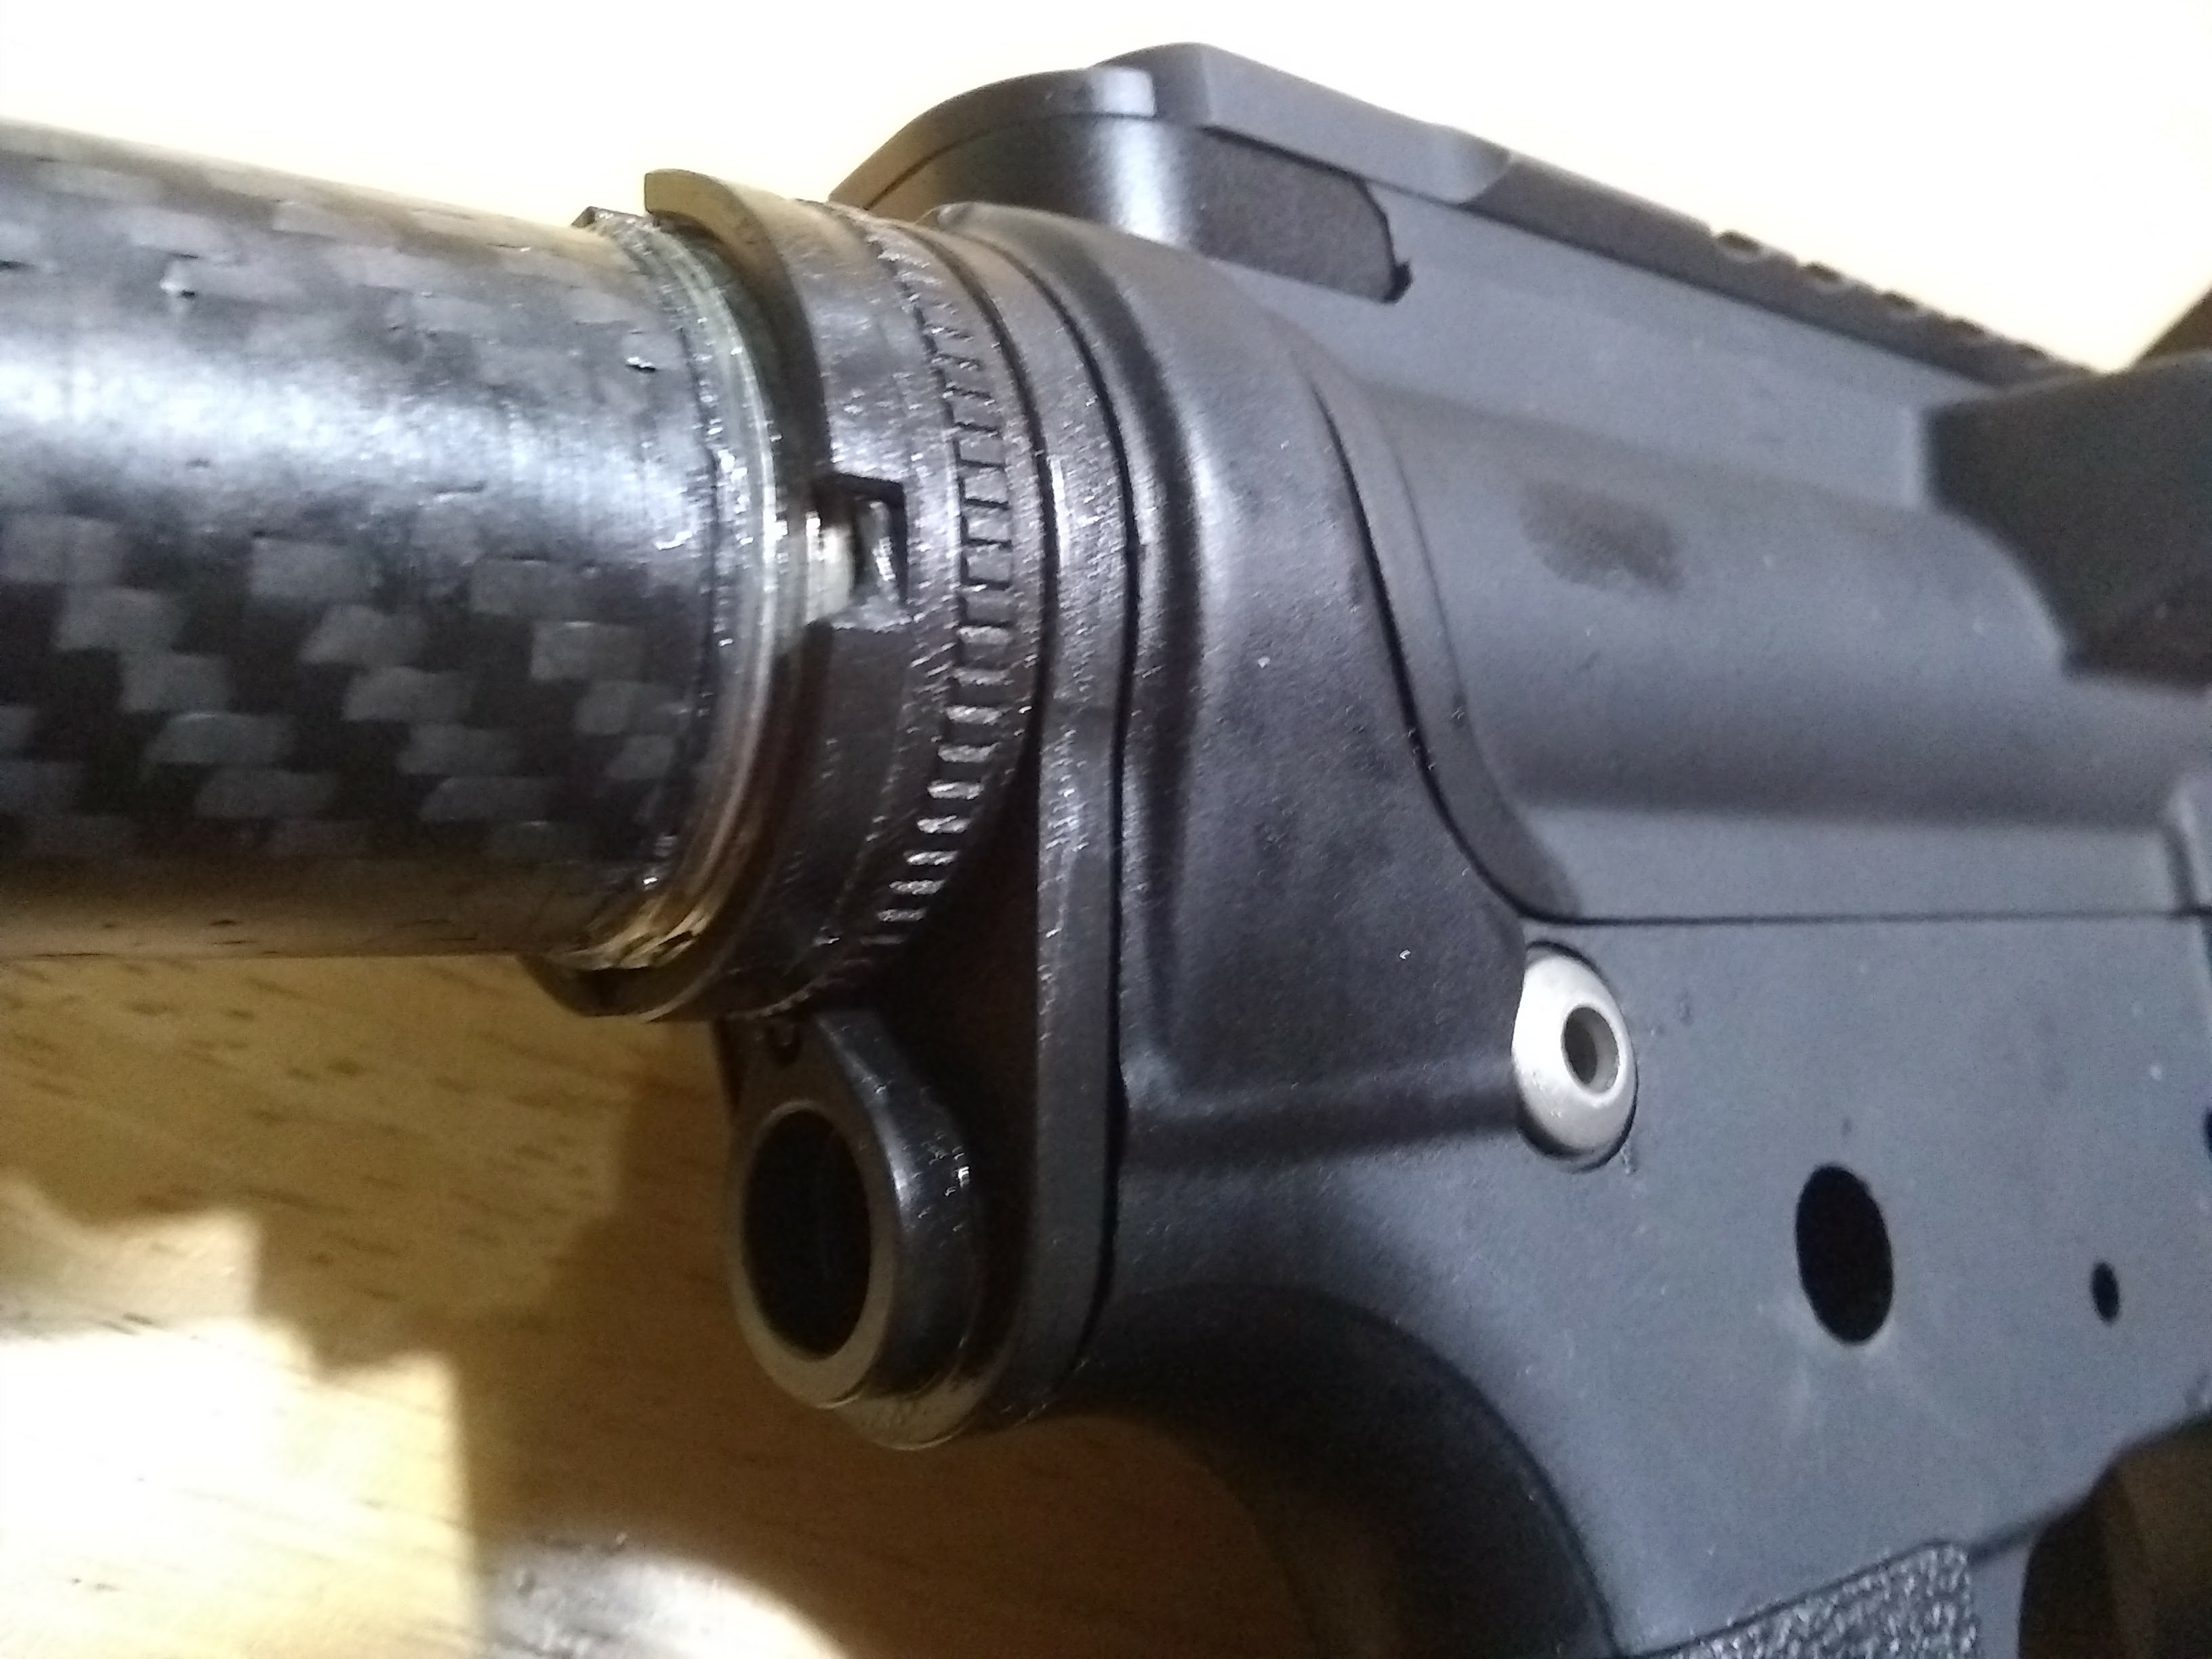 The endplate has a quick-detach mounting point for a sling. The ratcheting nut doesn't require staking. Both are produced by Primary Weapon Systems of Boise, just around the corner.